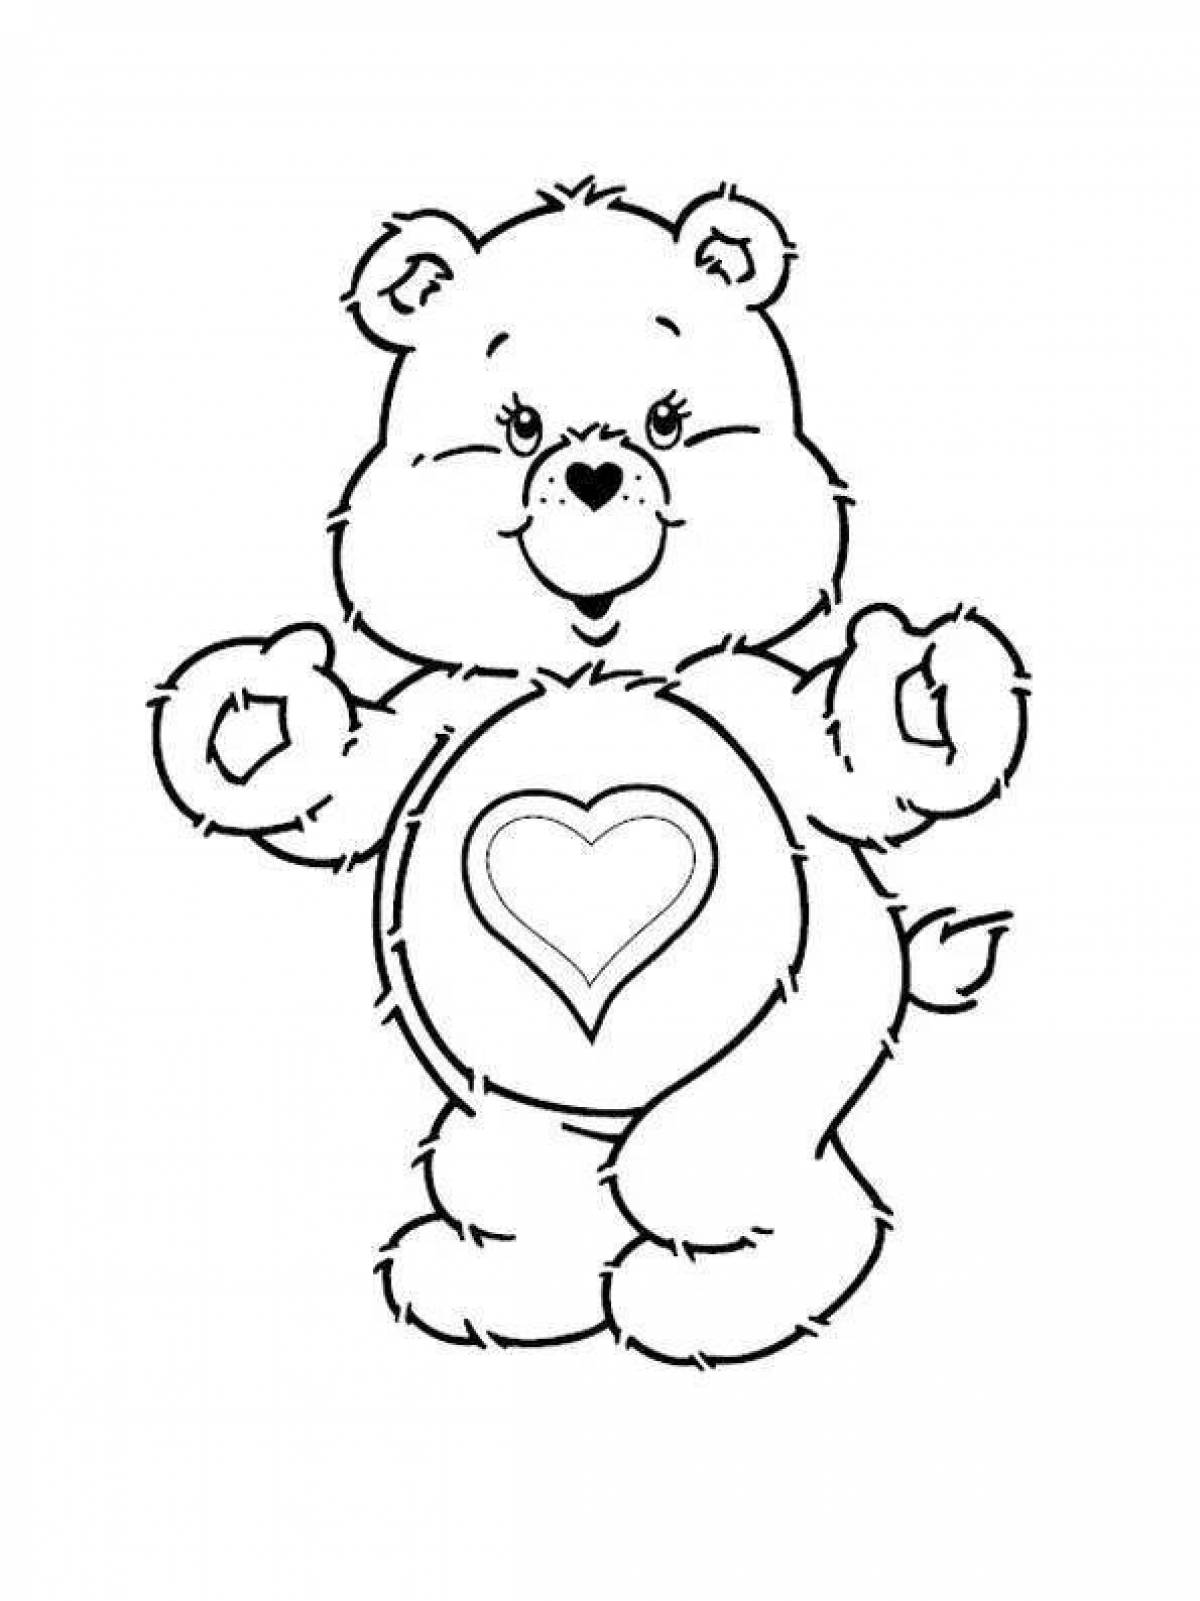 Tiny teddy bear with heart coloring book